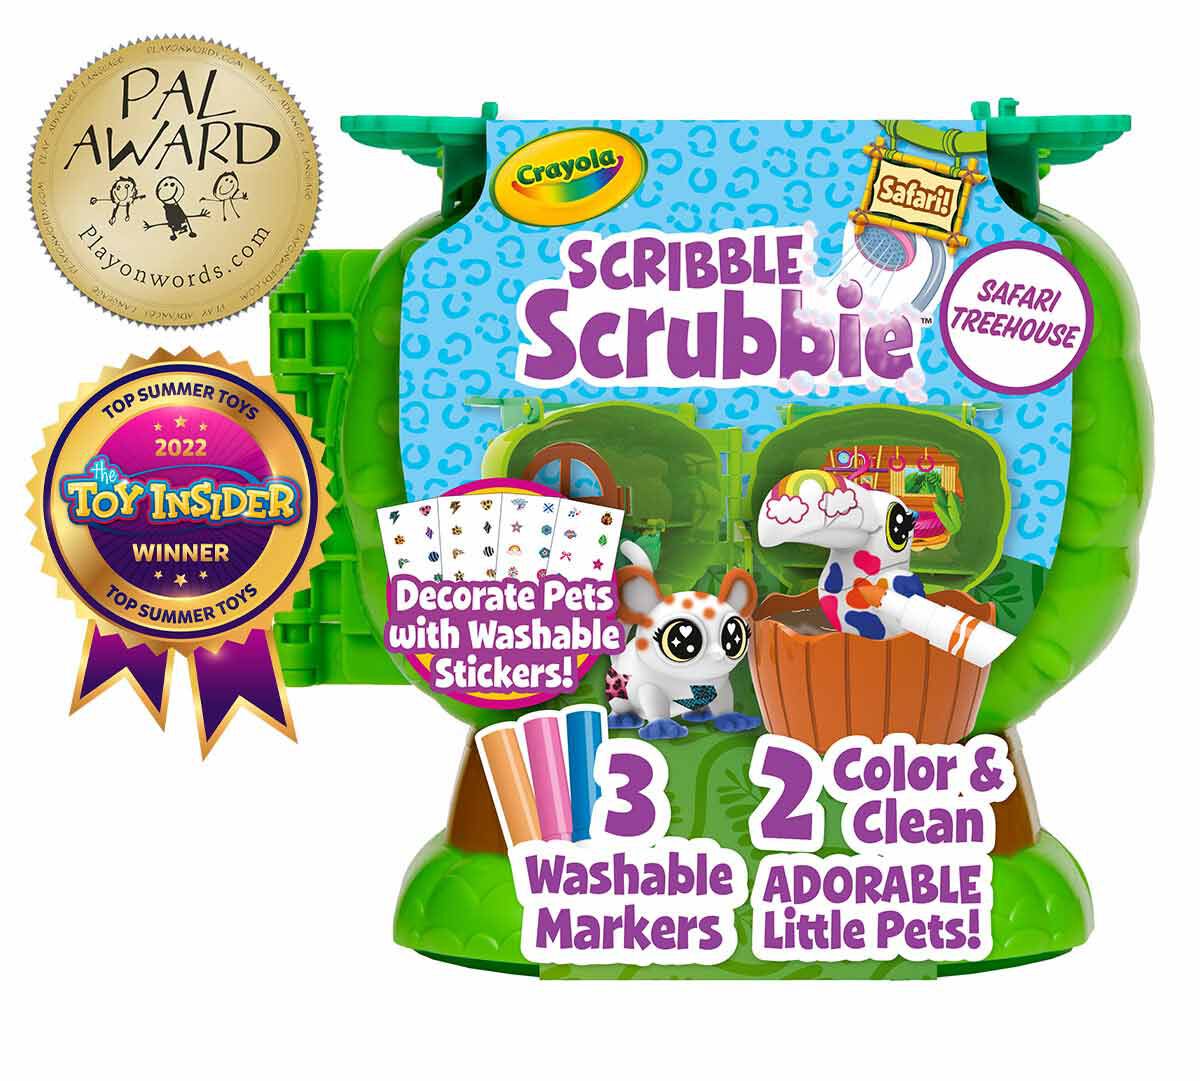 Crayola Scribble Scrubbie Pets Lot of 3 Safari & Markers Color&Clean New Sealed 